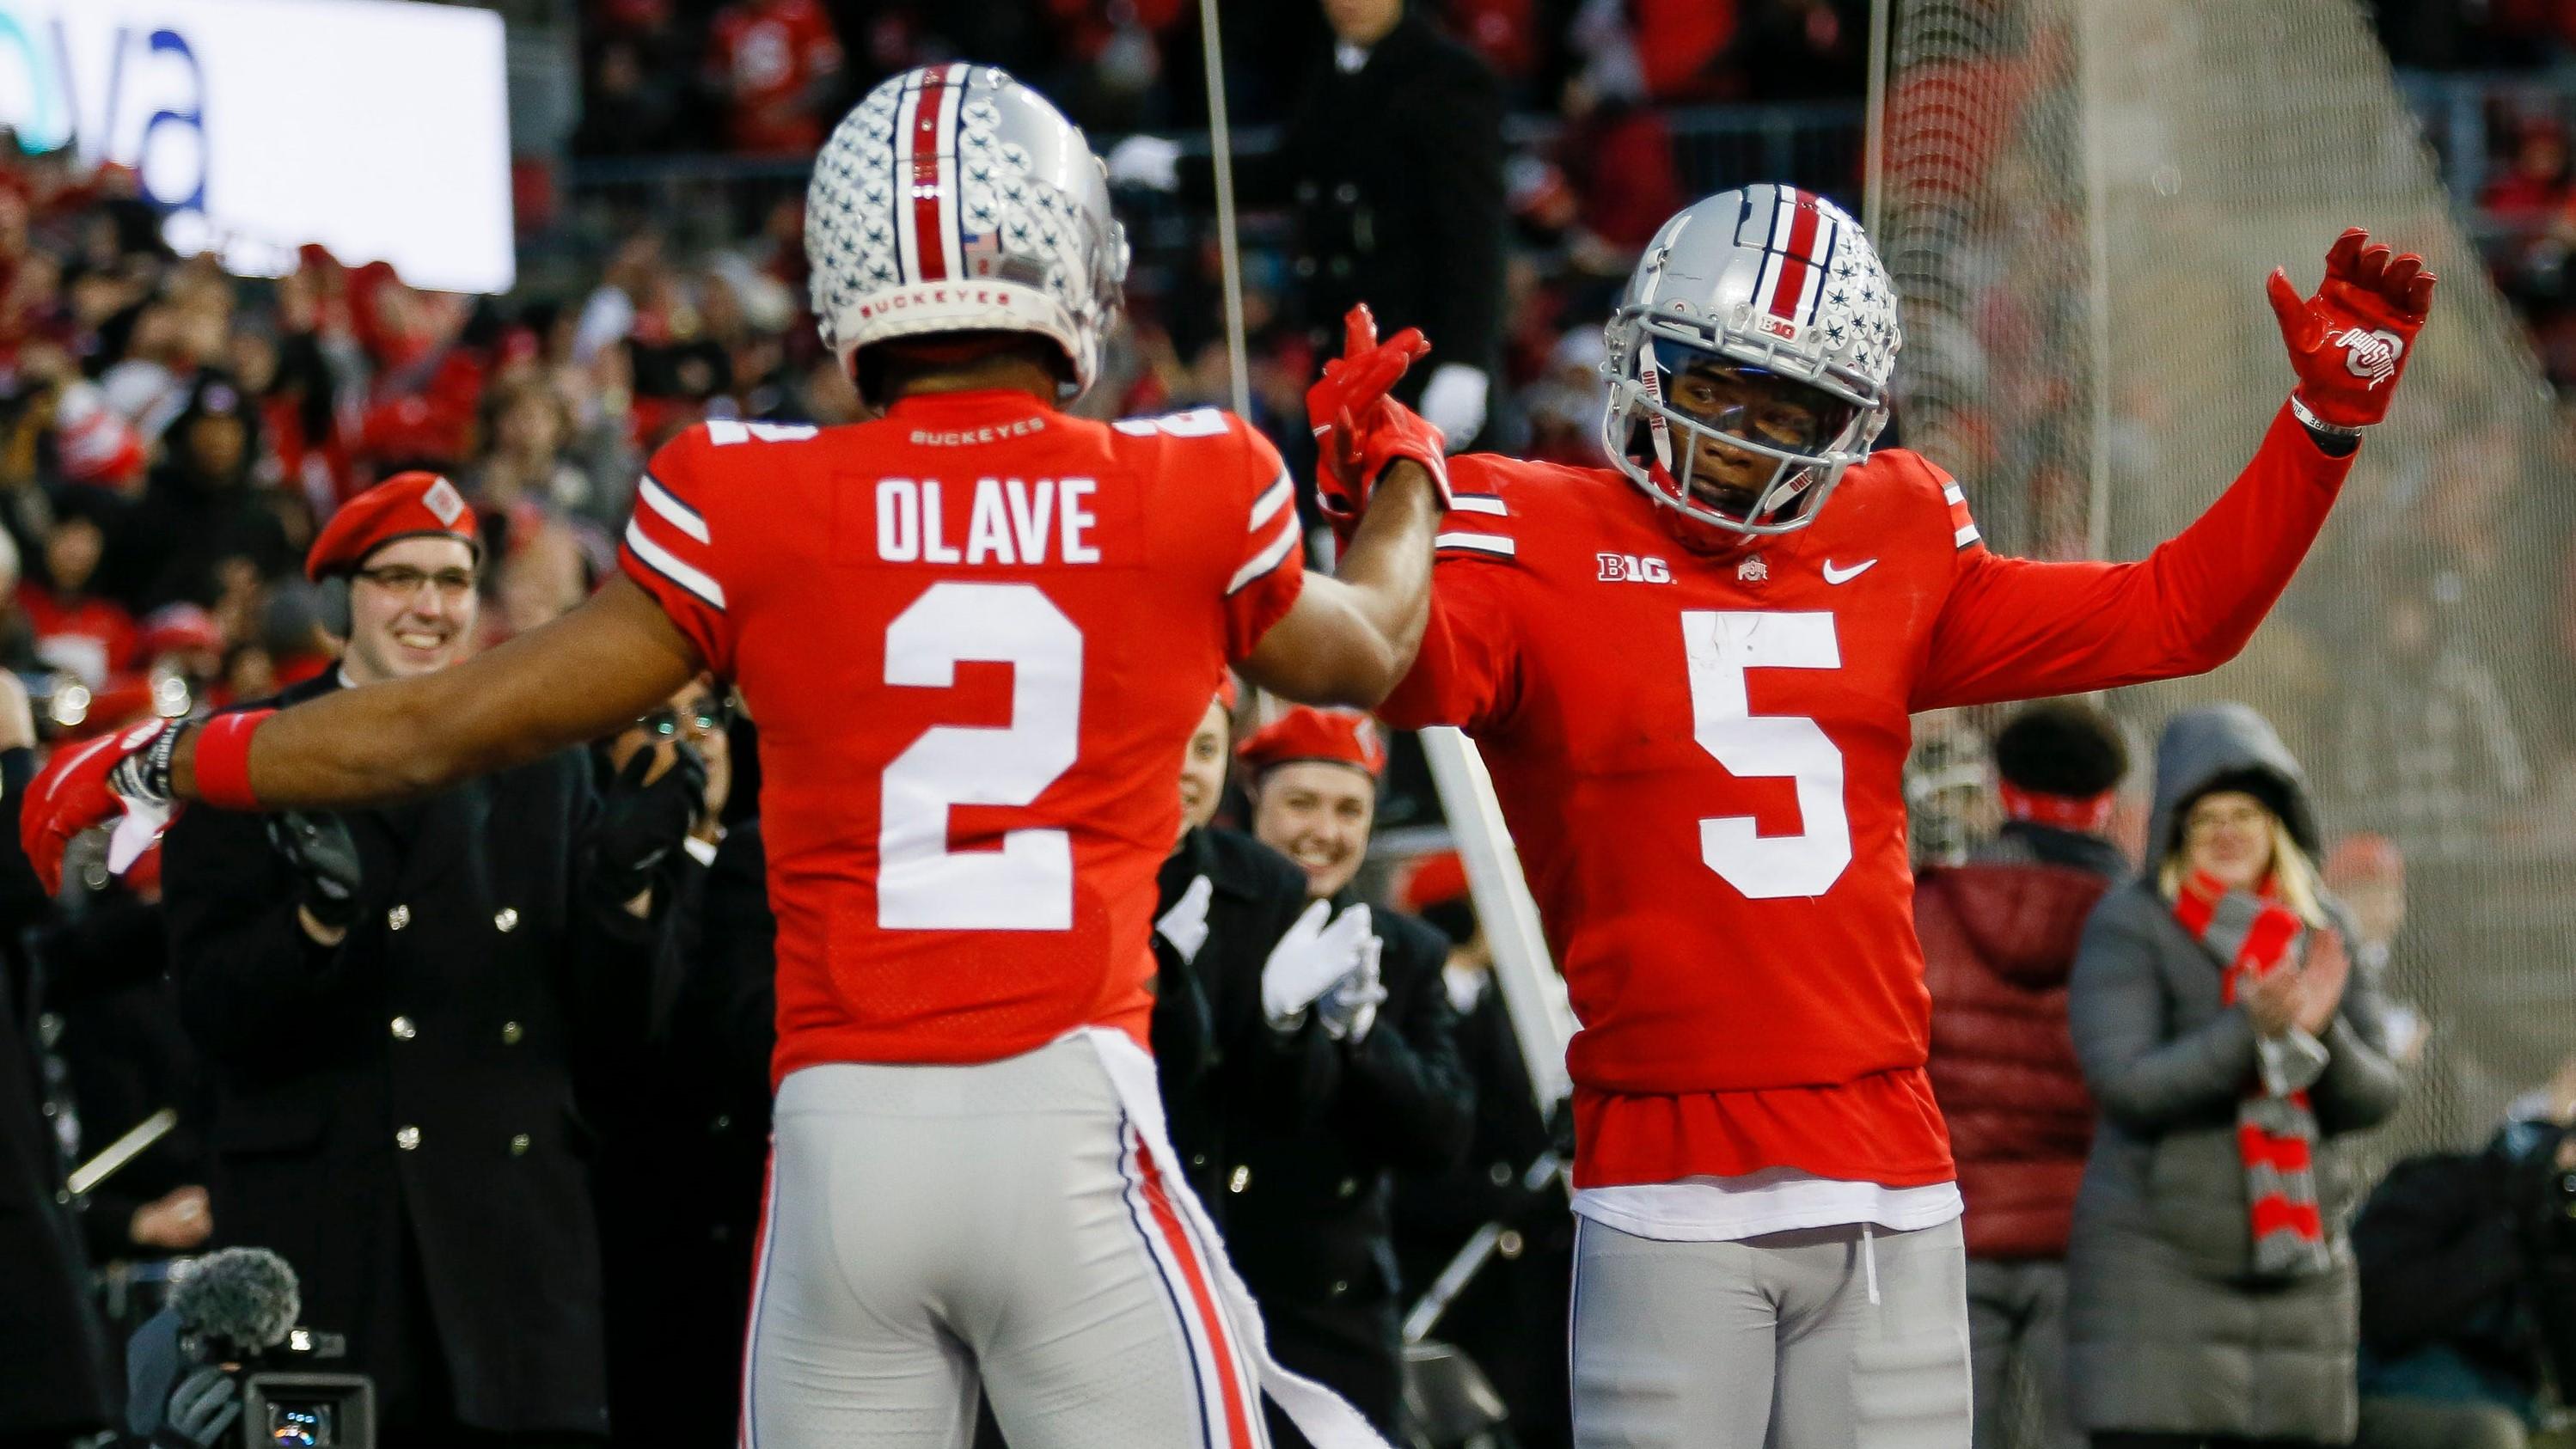 Ohio State Buckeyes wide receiver Garrett Wilson (5) celebrates a 51-yard touchdown with wide receiver Chris Olave (2) during the second quarter of the NCAA football game against the Purdue Boilermakers at Ohio Stadium in Columbus on Saturday, Nov. 13, 2021. / Adam Cairns/Columbus Dispatch / USA TODAY NETWORK